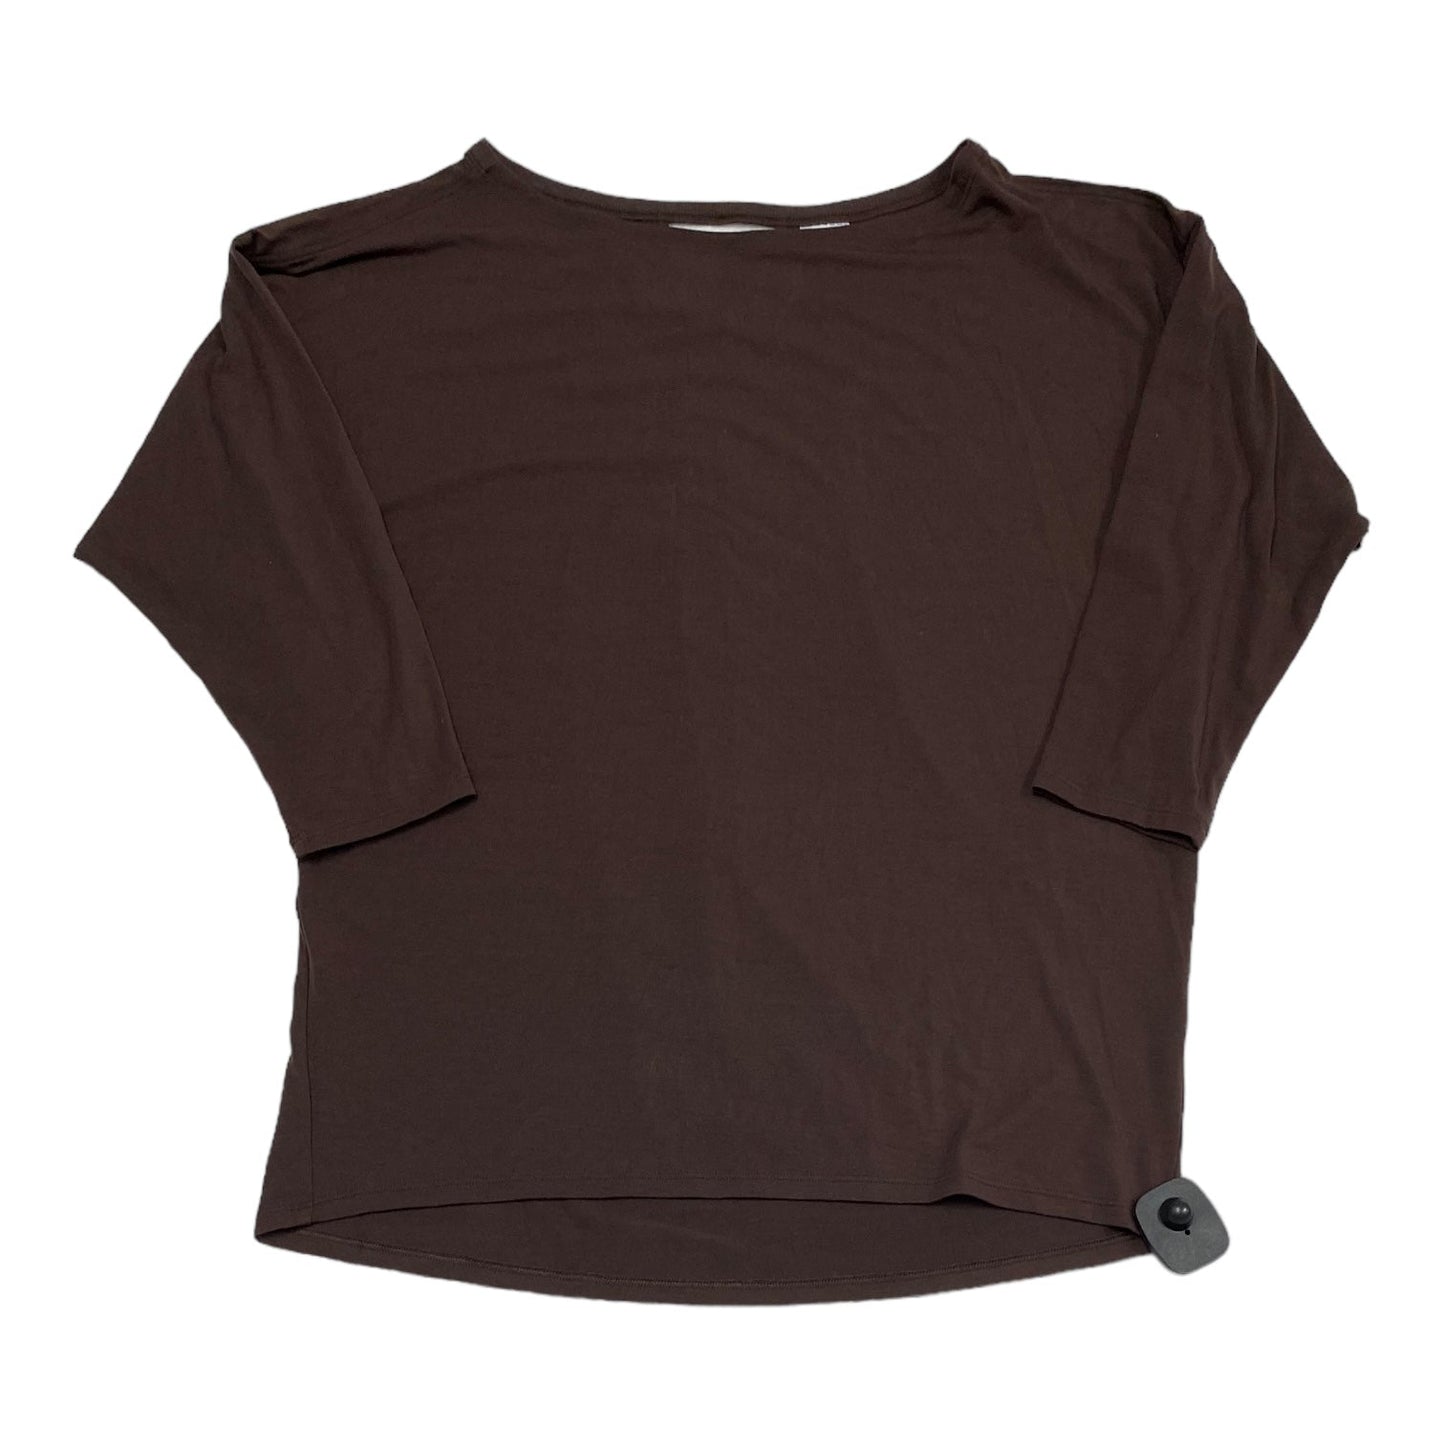 Brown Athletic Top Long Sleeve Collar Athleta, Size M